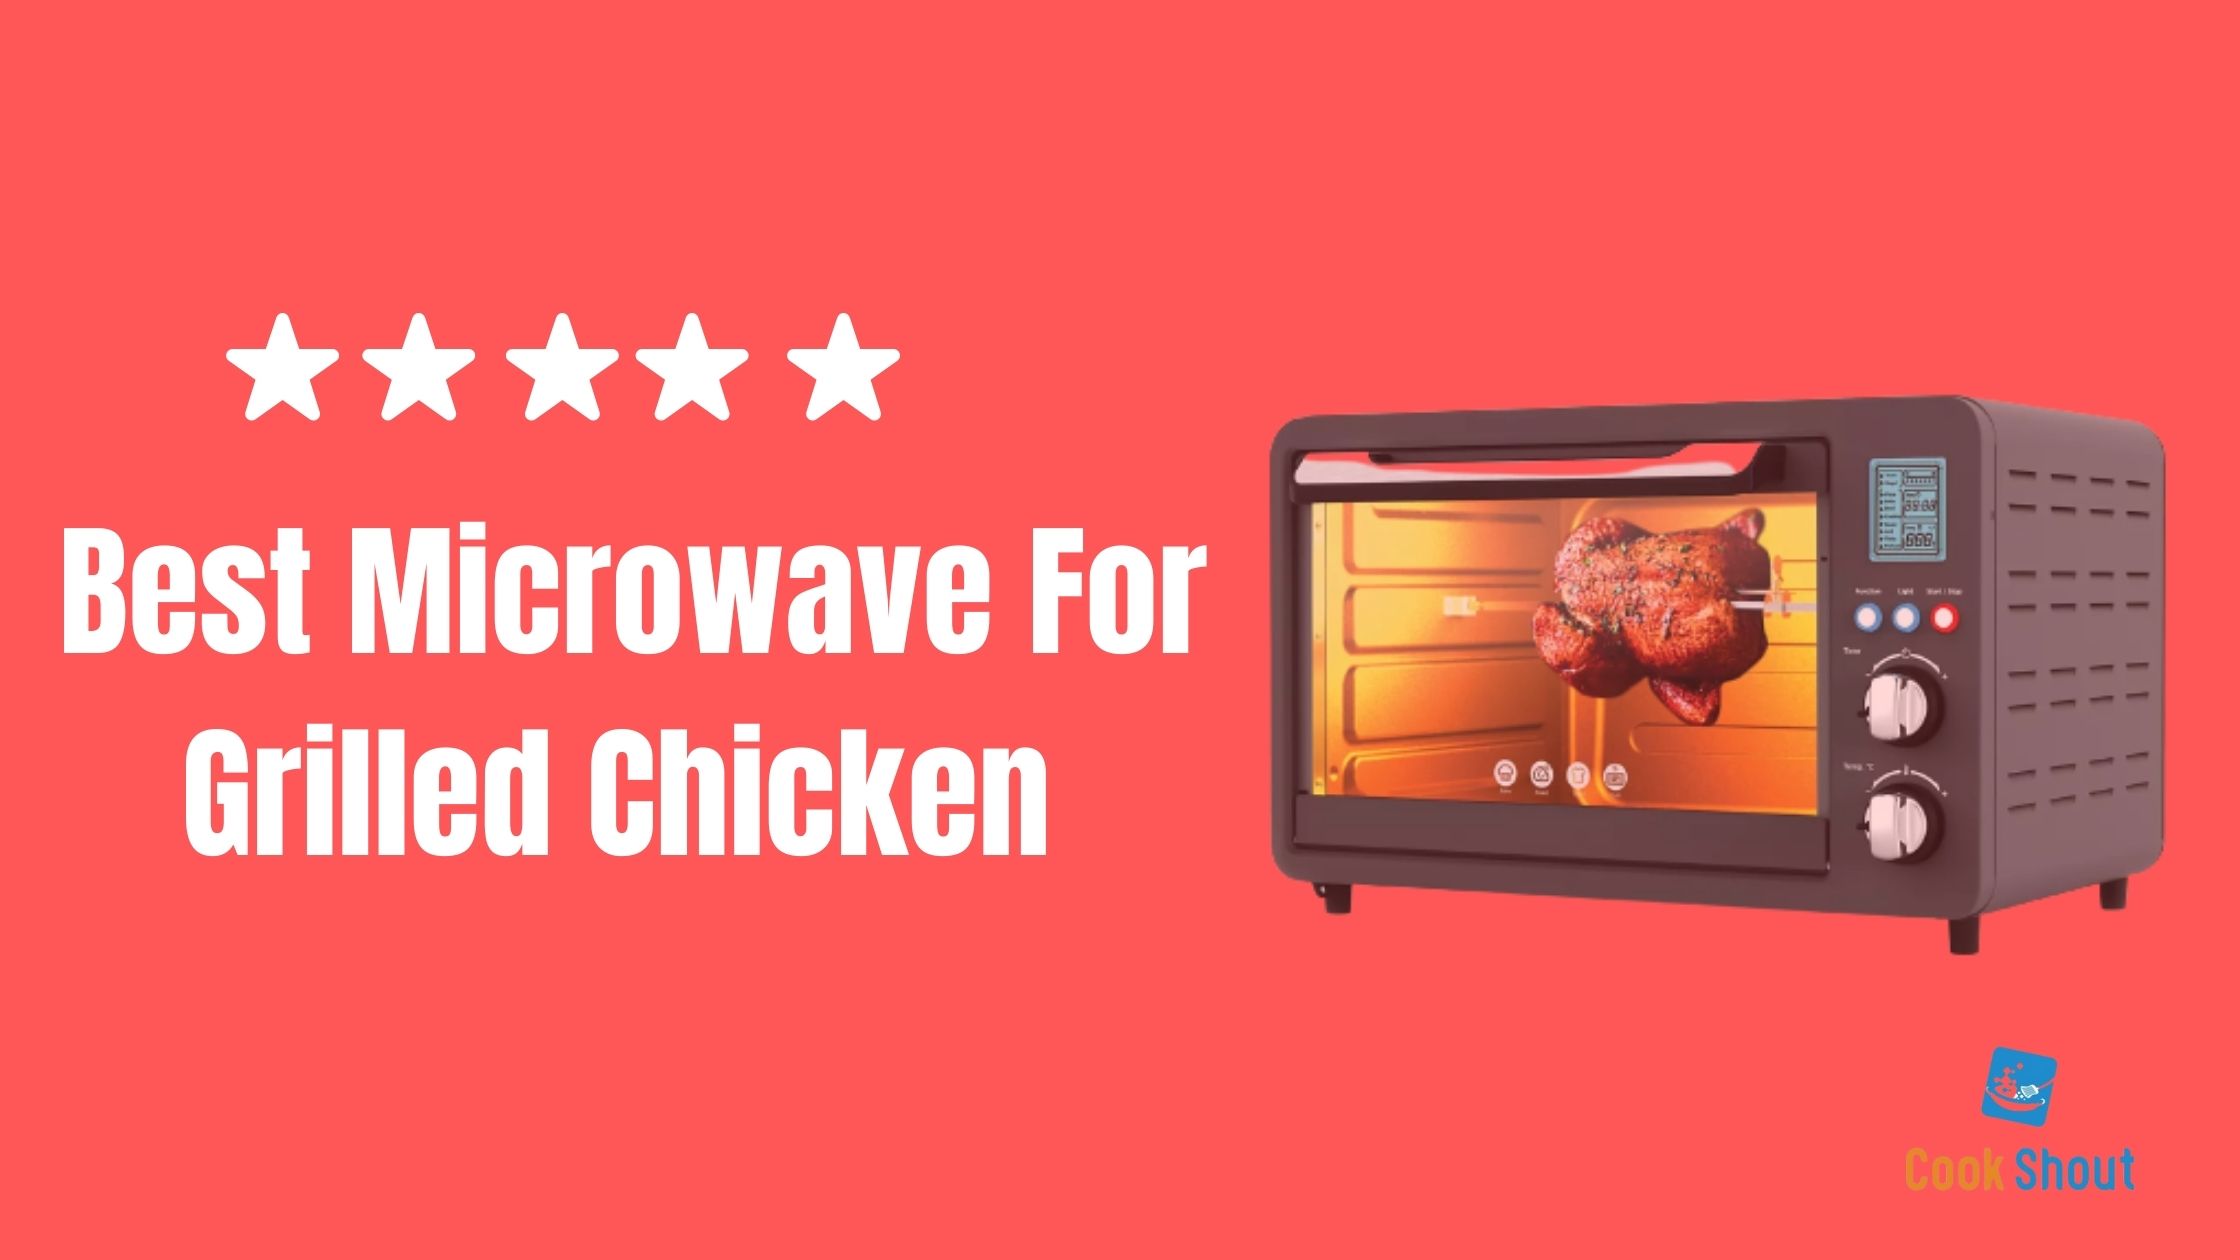 Best Microwave For Grilled Chicken 2021